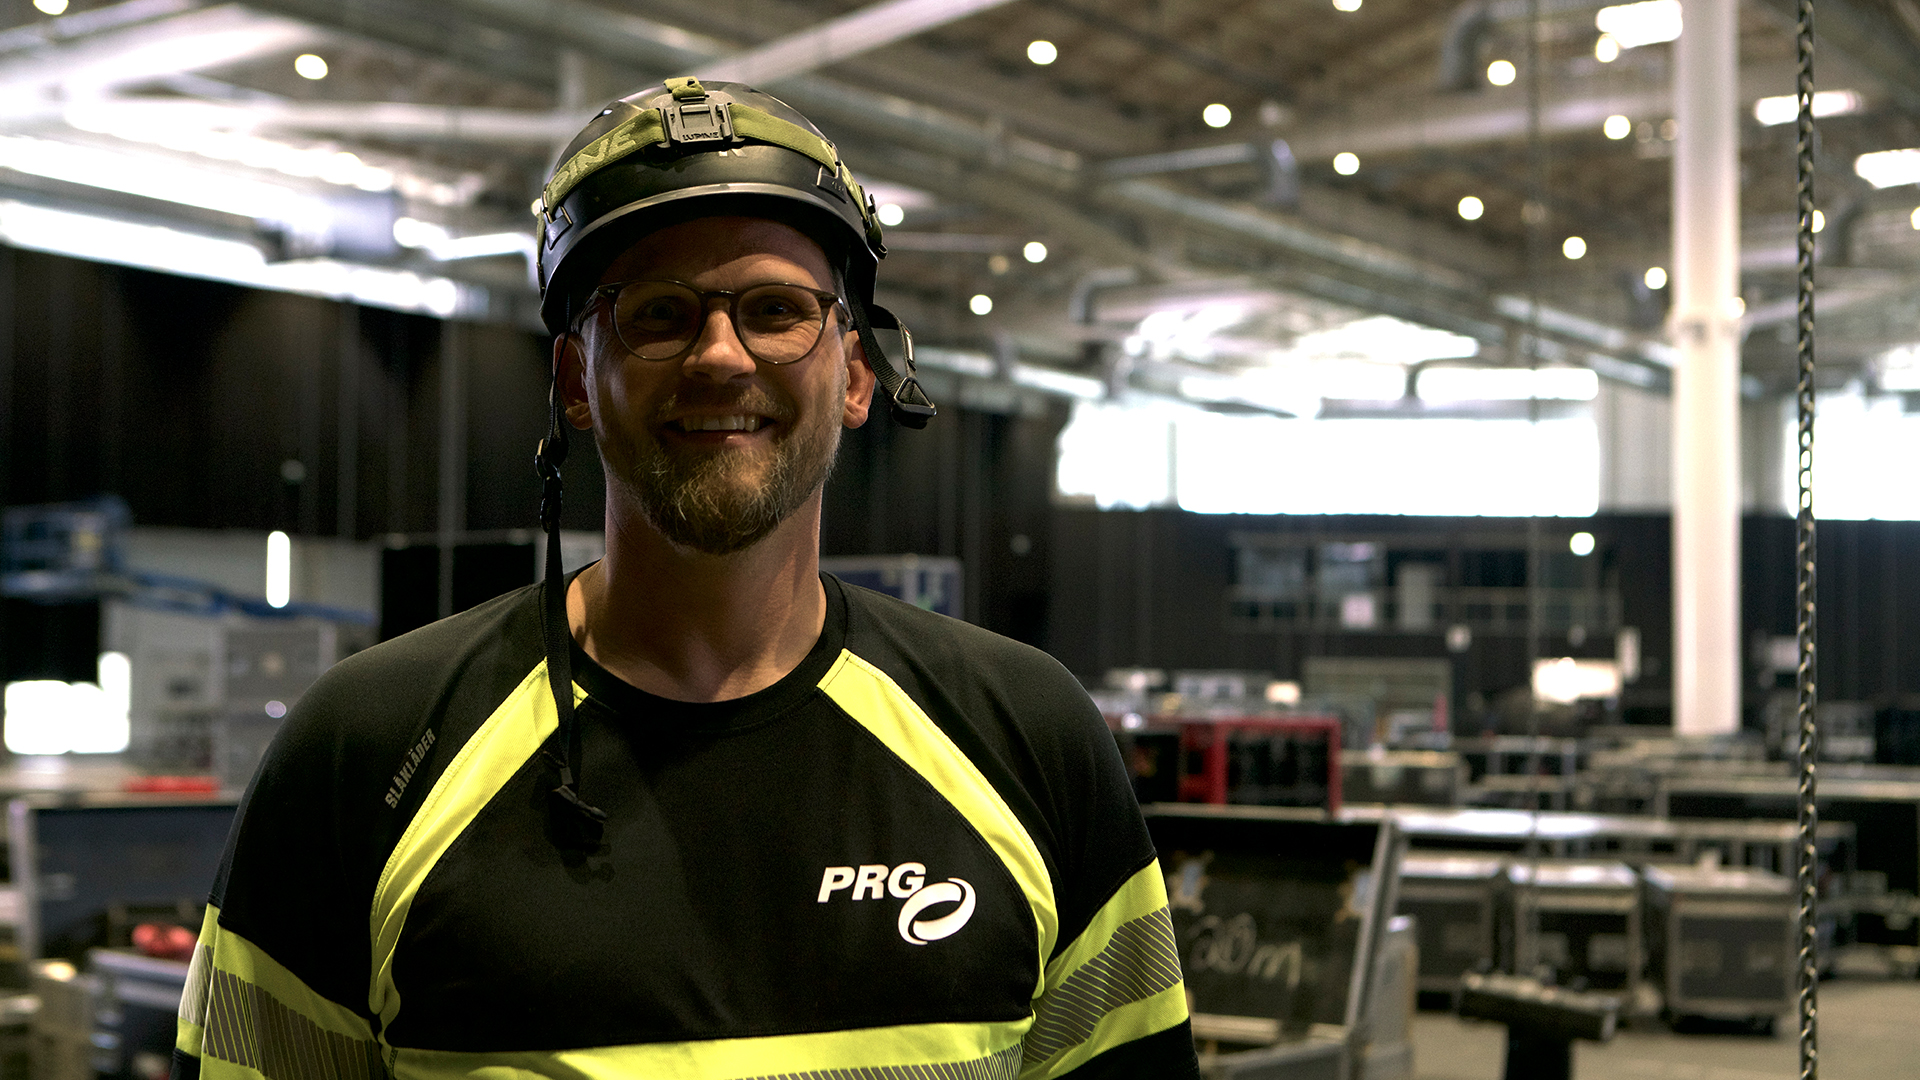 Meet Team PRG at the OMR. Bastian Bensmann our rigging expert at the event.